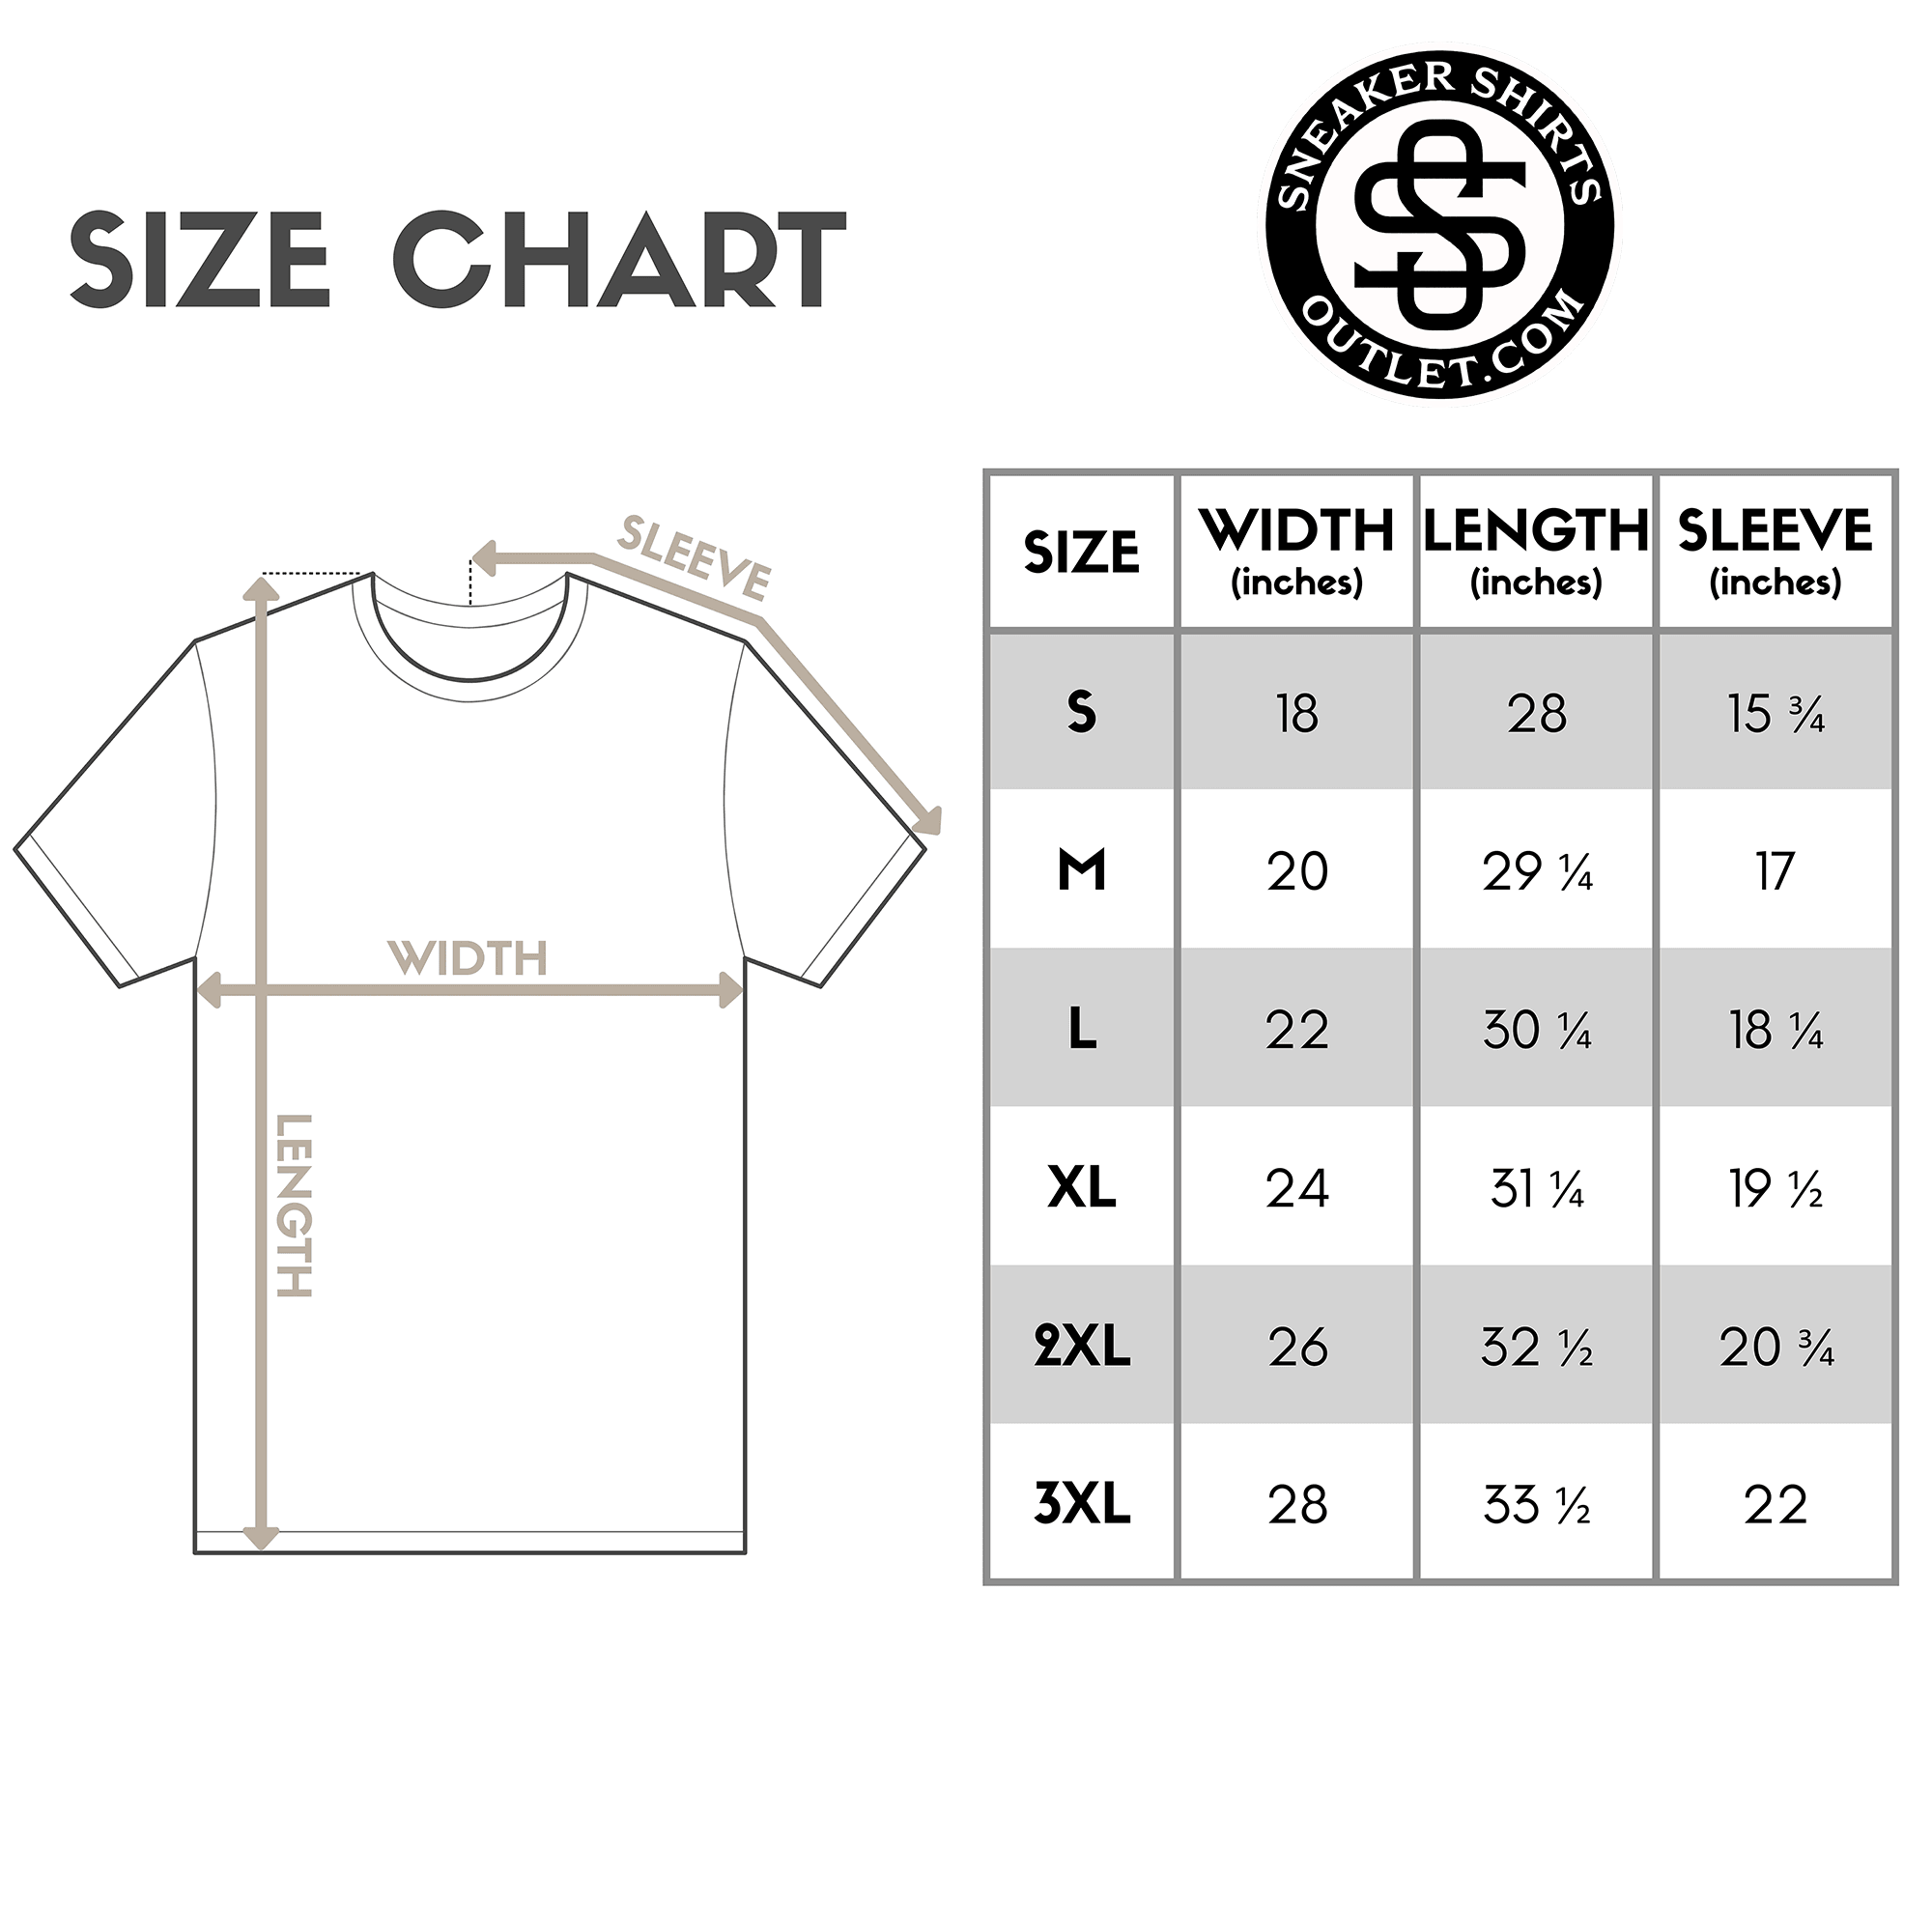 size chart H for Hustle Shirt Yeezy Boost 700s Bright Blue photo